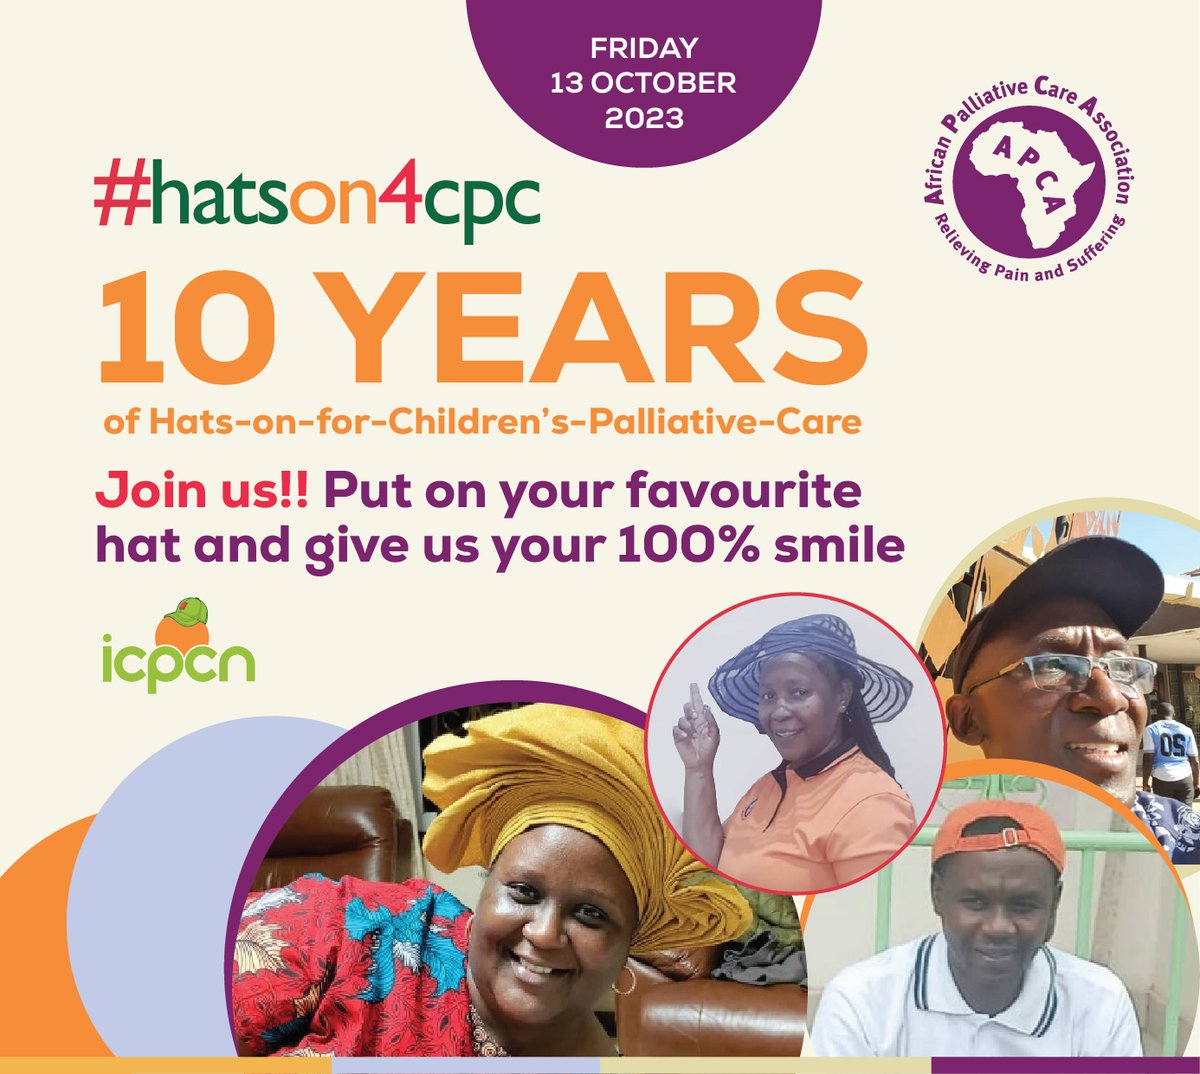 #hatson4cpc10 98% of children needing #palliativecare live in low- & middle-income countries (LMICs), & almost half of them live in Africa. Access info about the @true_colours small grants to support #palliativecare development in #Africa here bit.ly/3PPLdqJ @SIOPAfrica